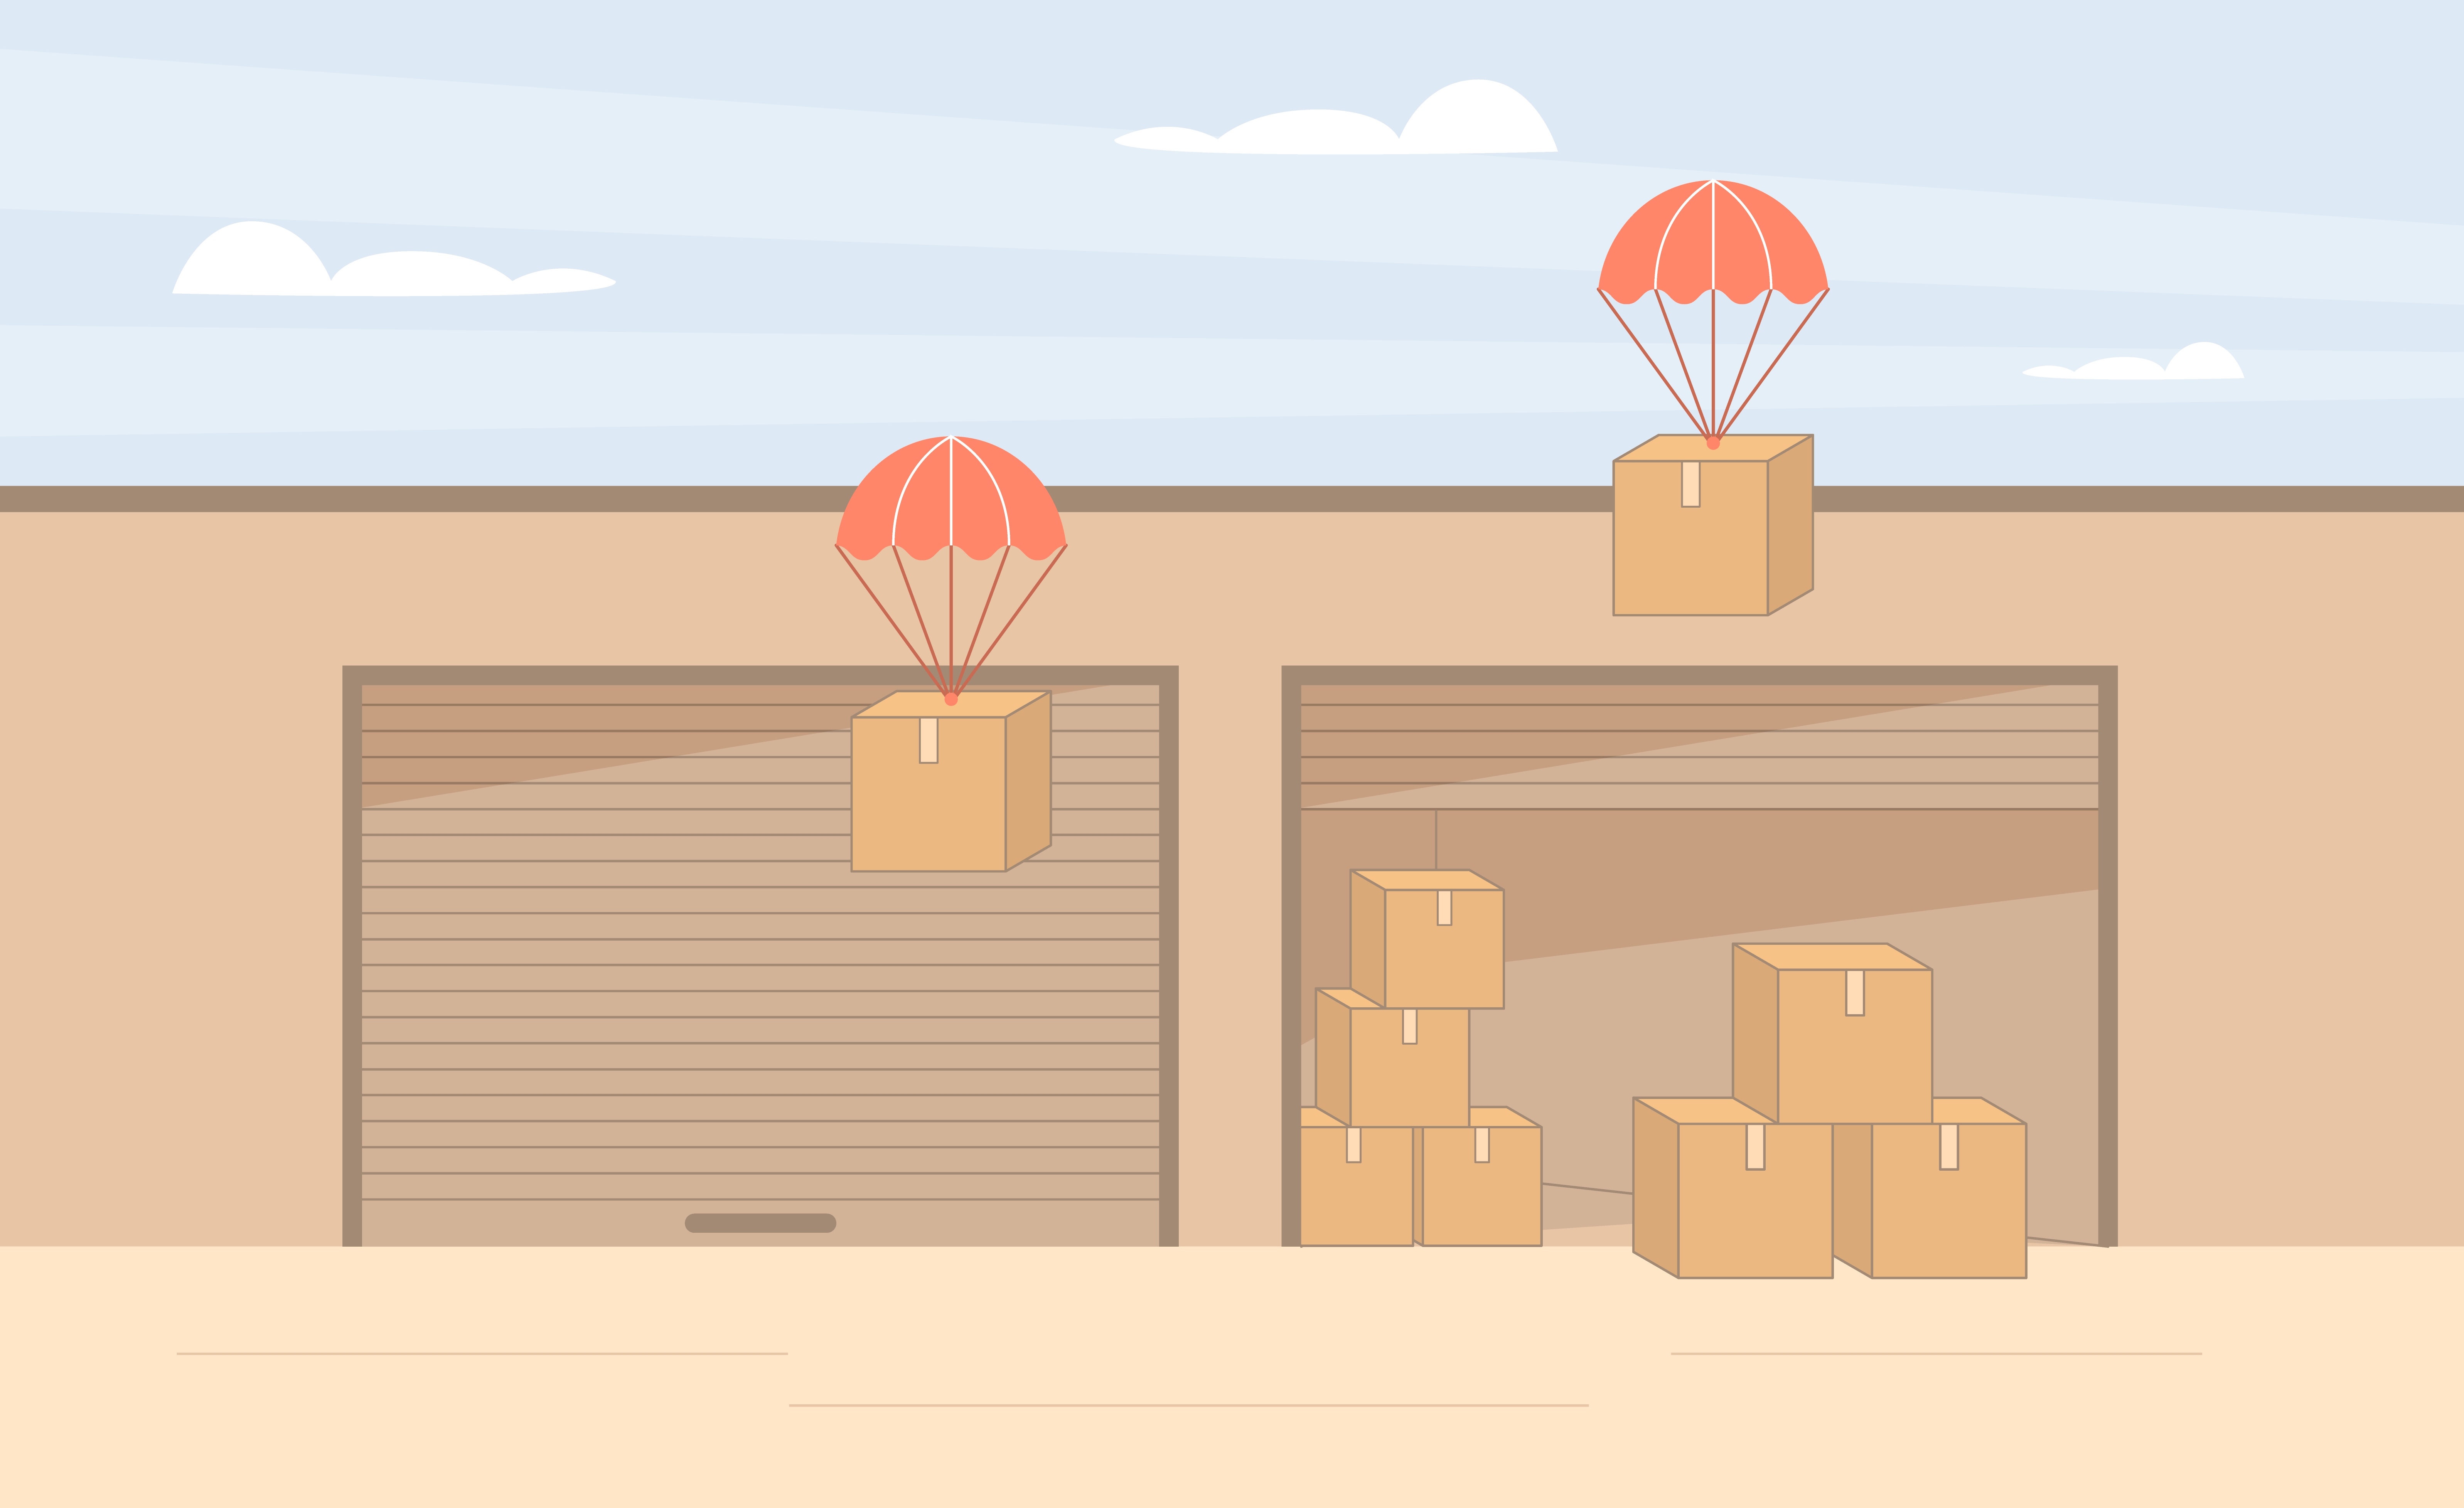 An illustration of small parachutes attached to packages descending on a warehouse.